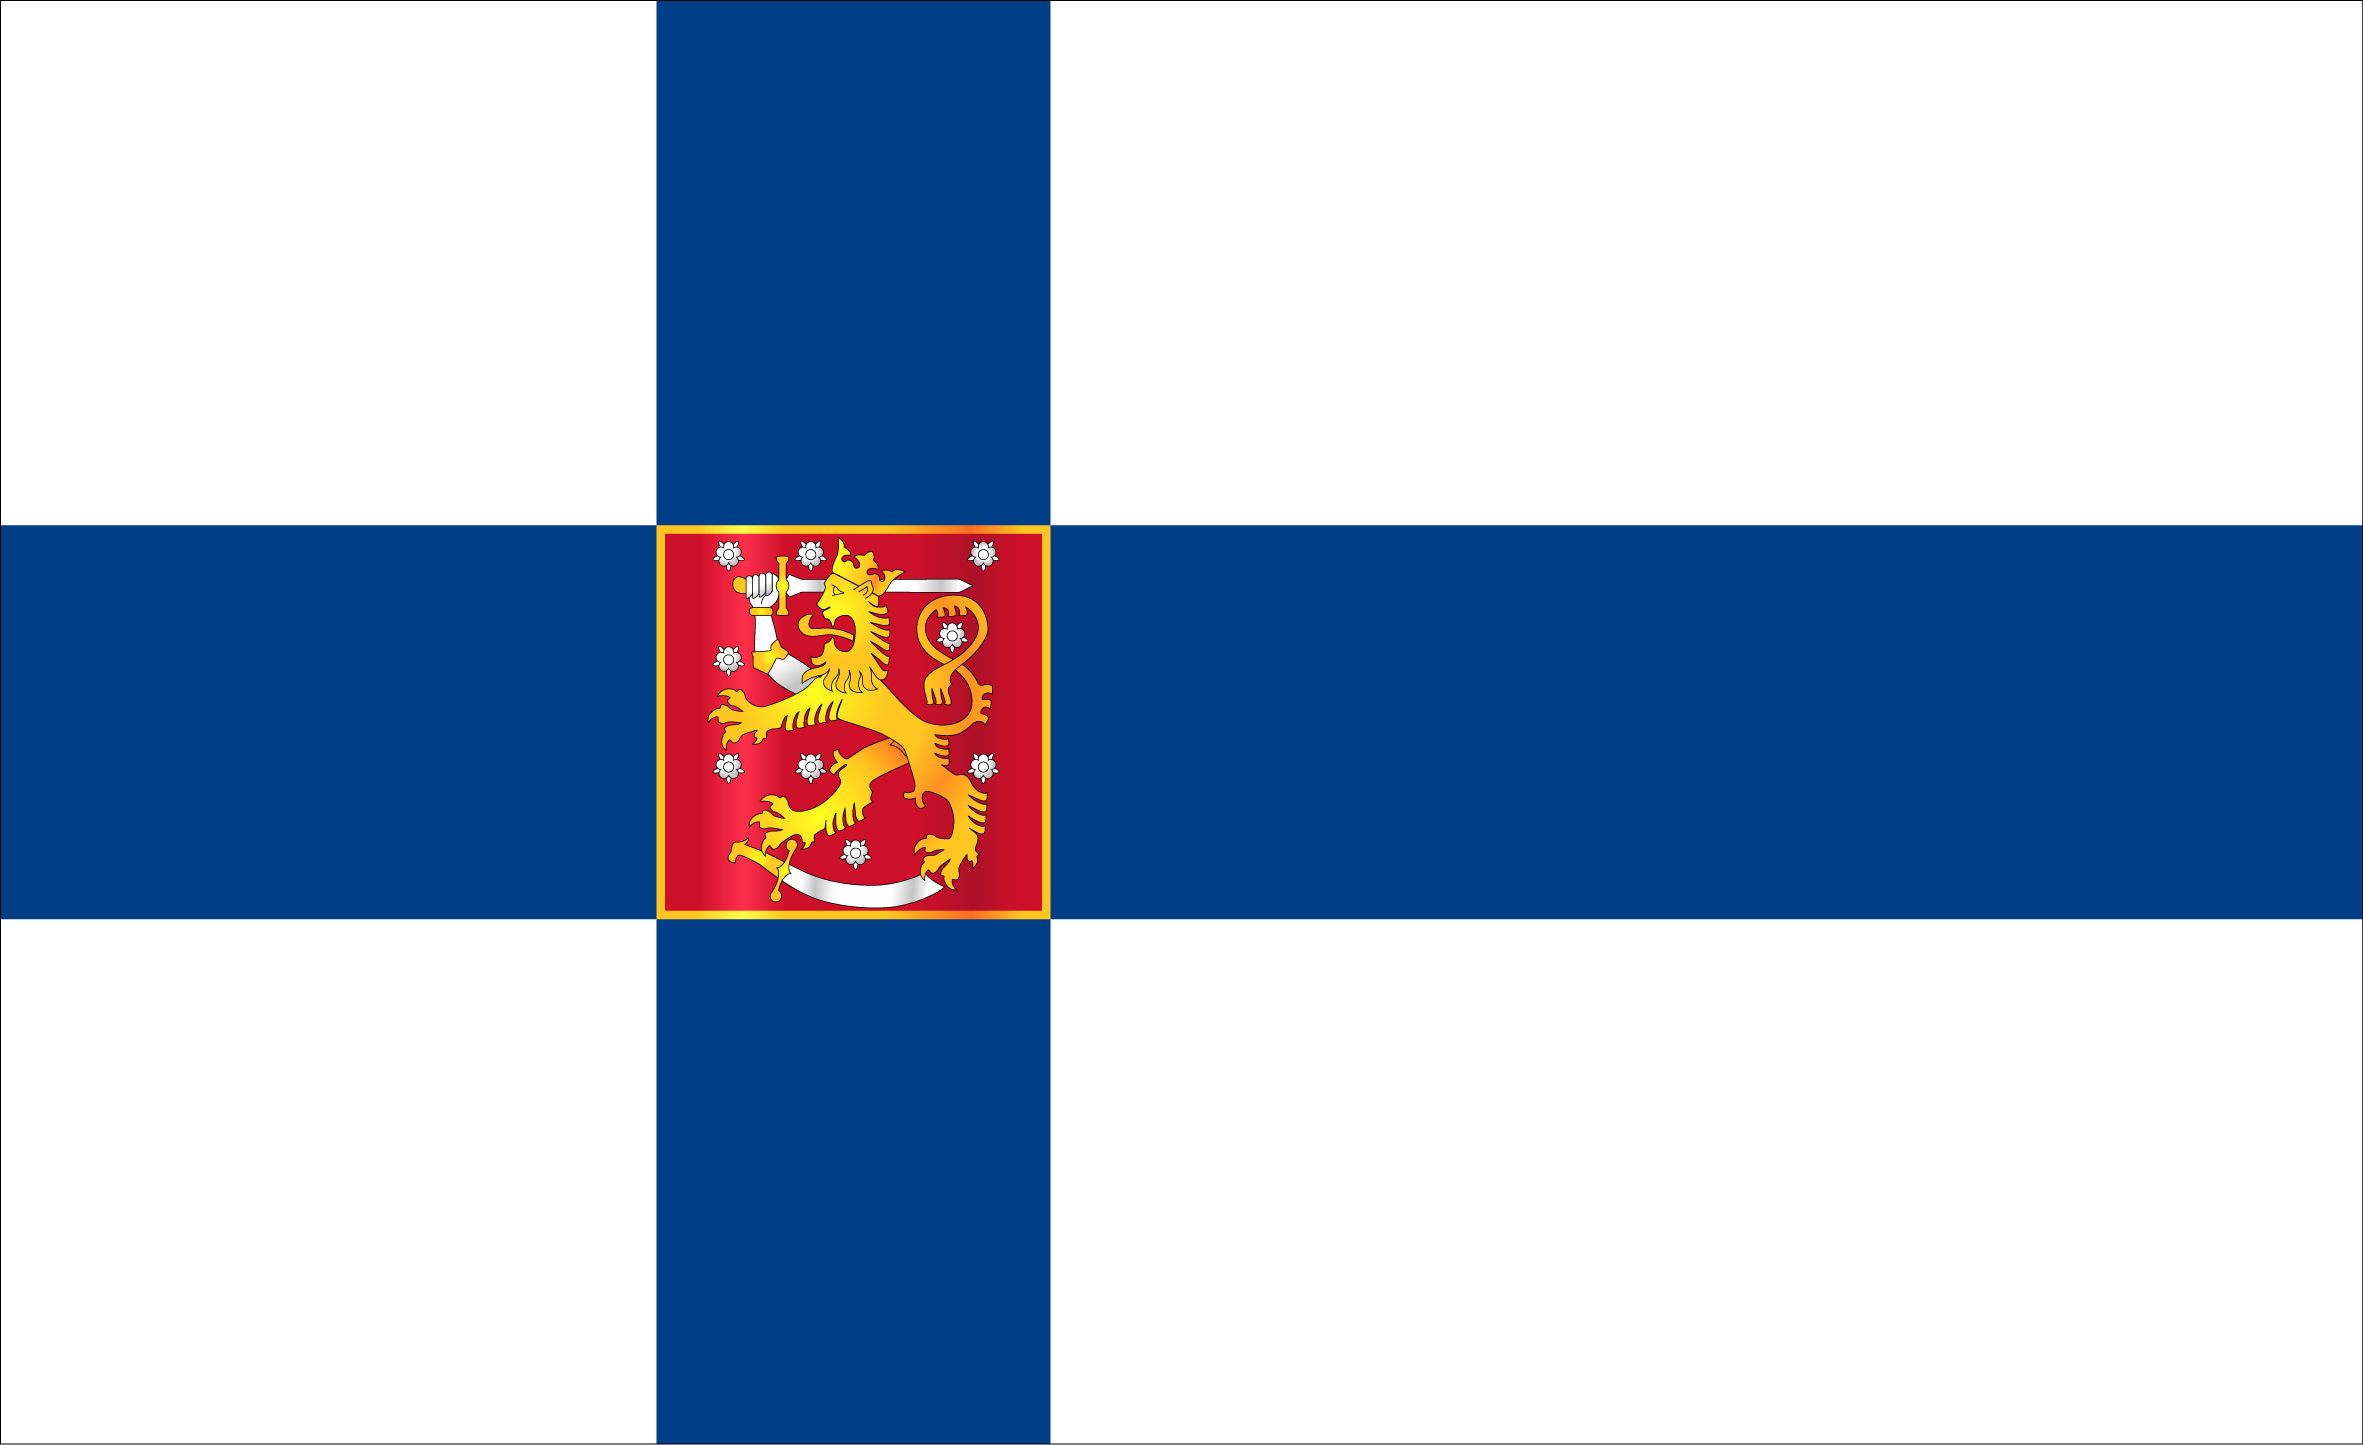 I love how Finland has a Military flag and a regular flag =) This